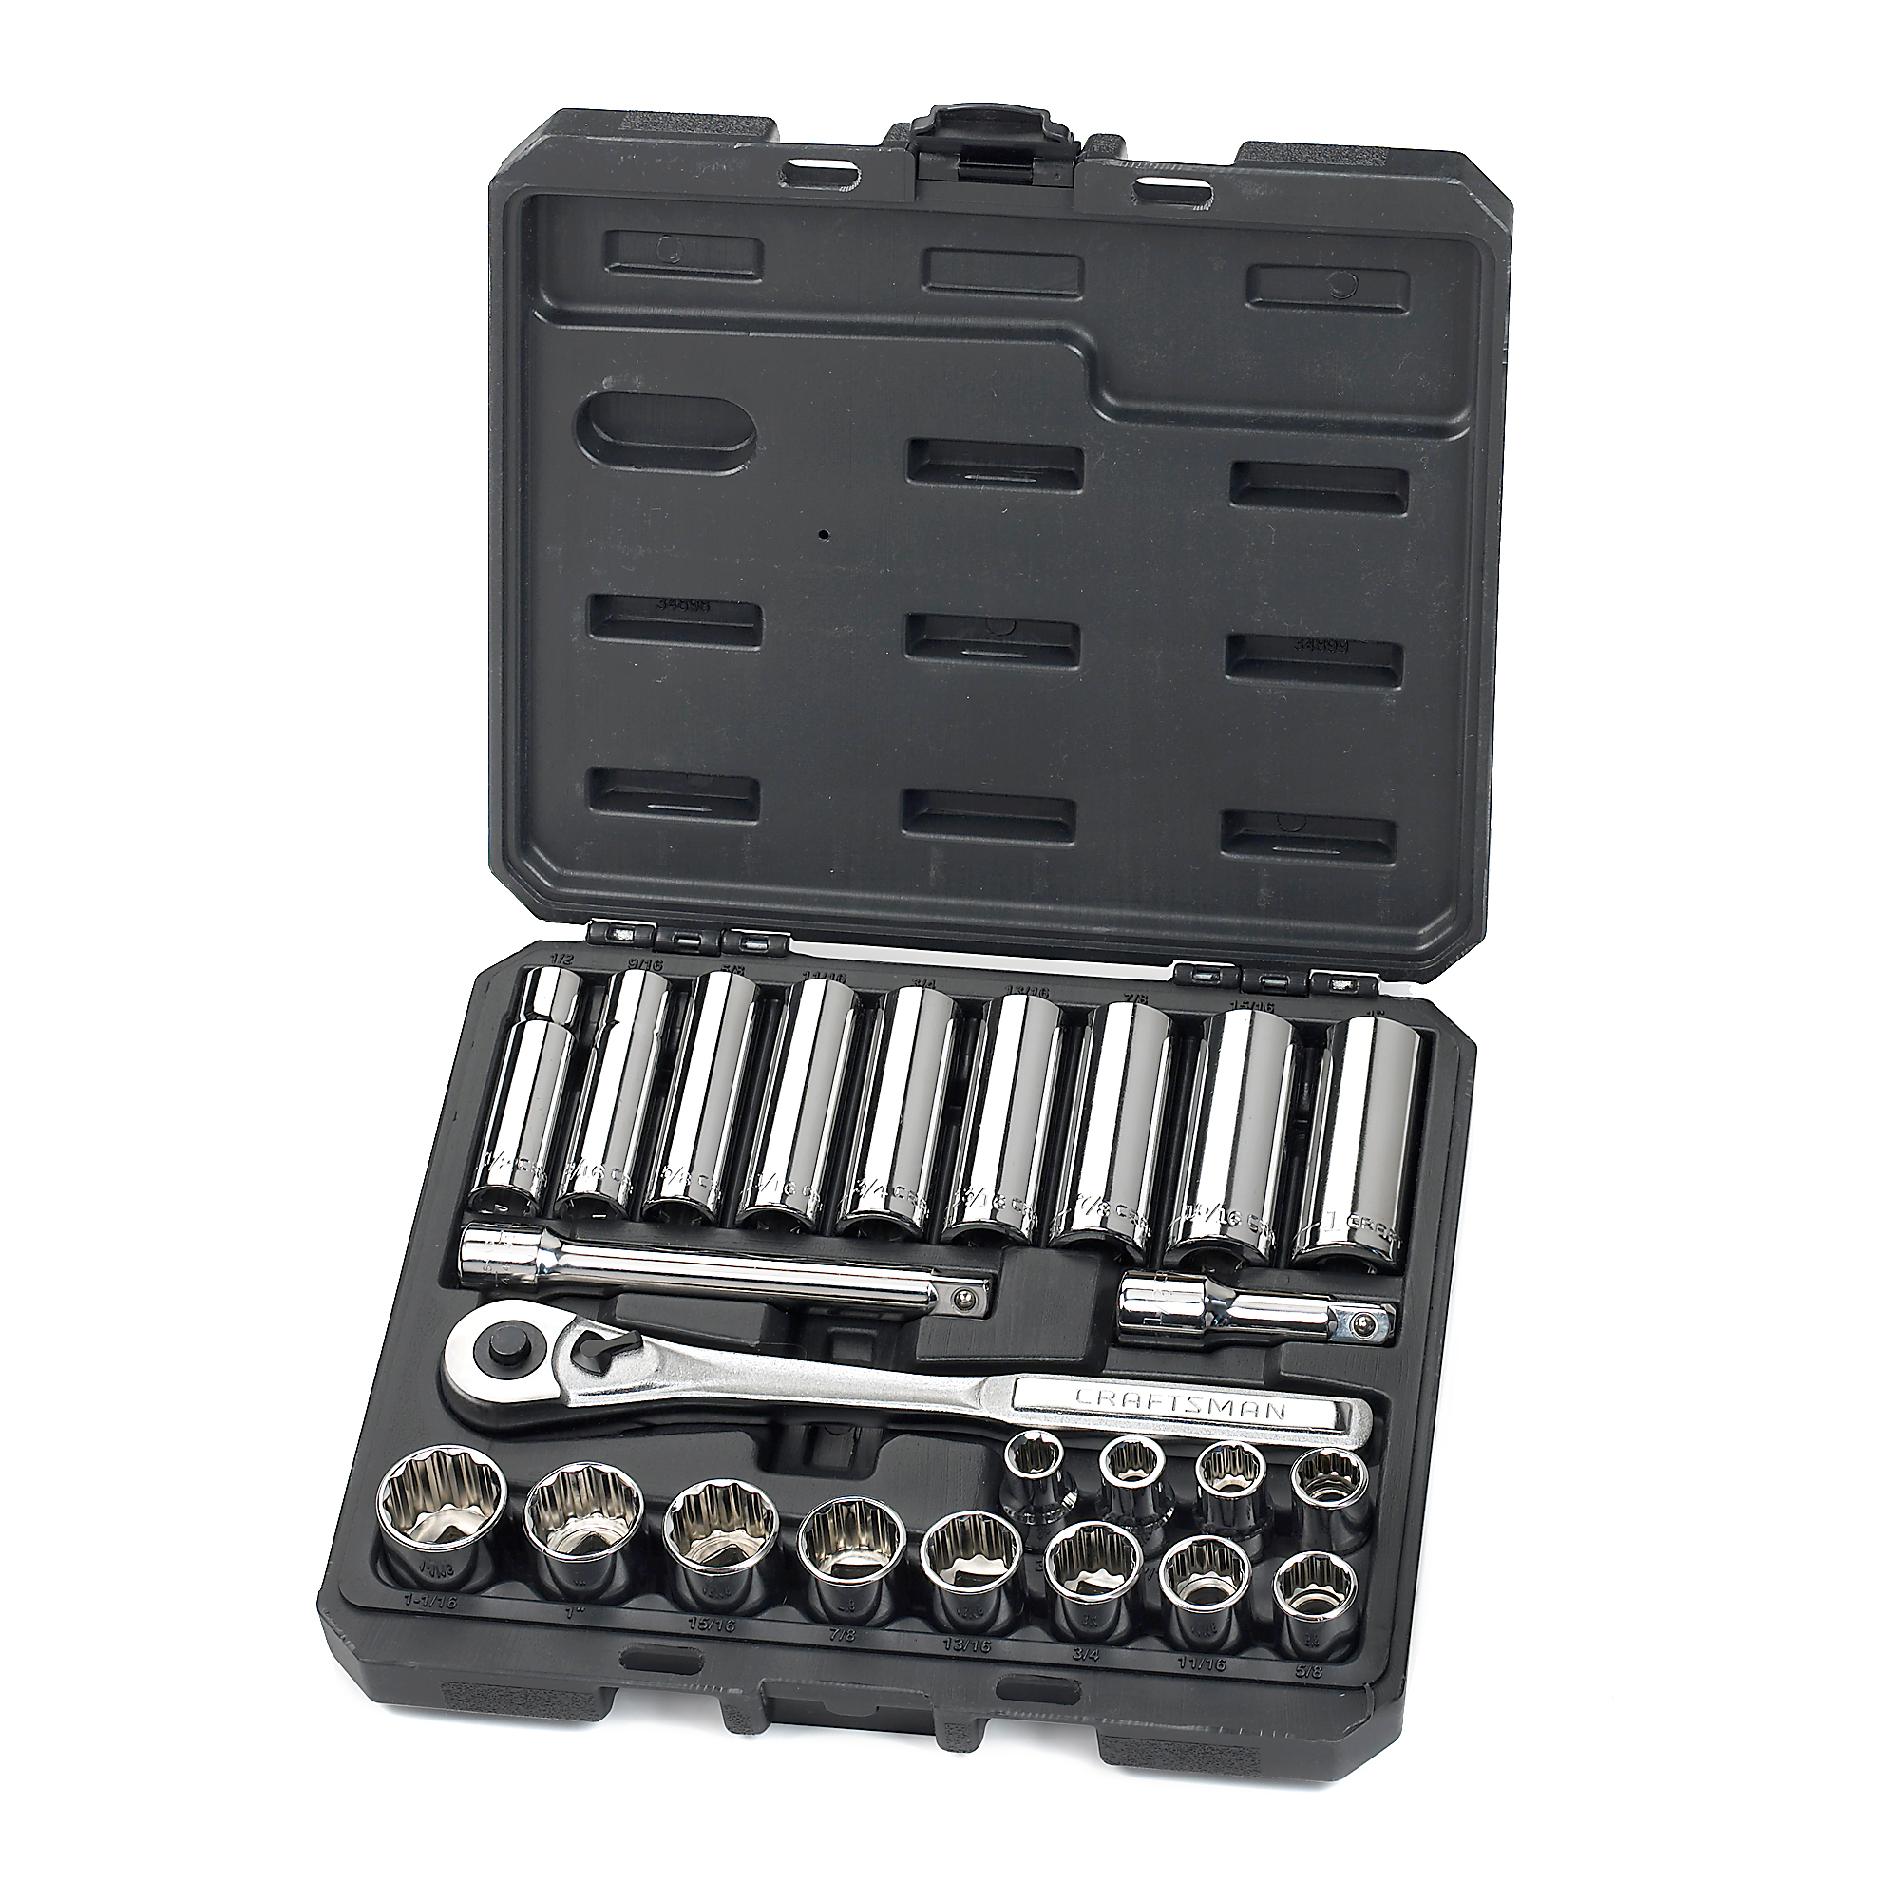 24 Pc Inch 1/2" Socket Set Get a Grip at Sears